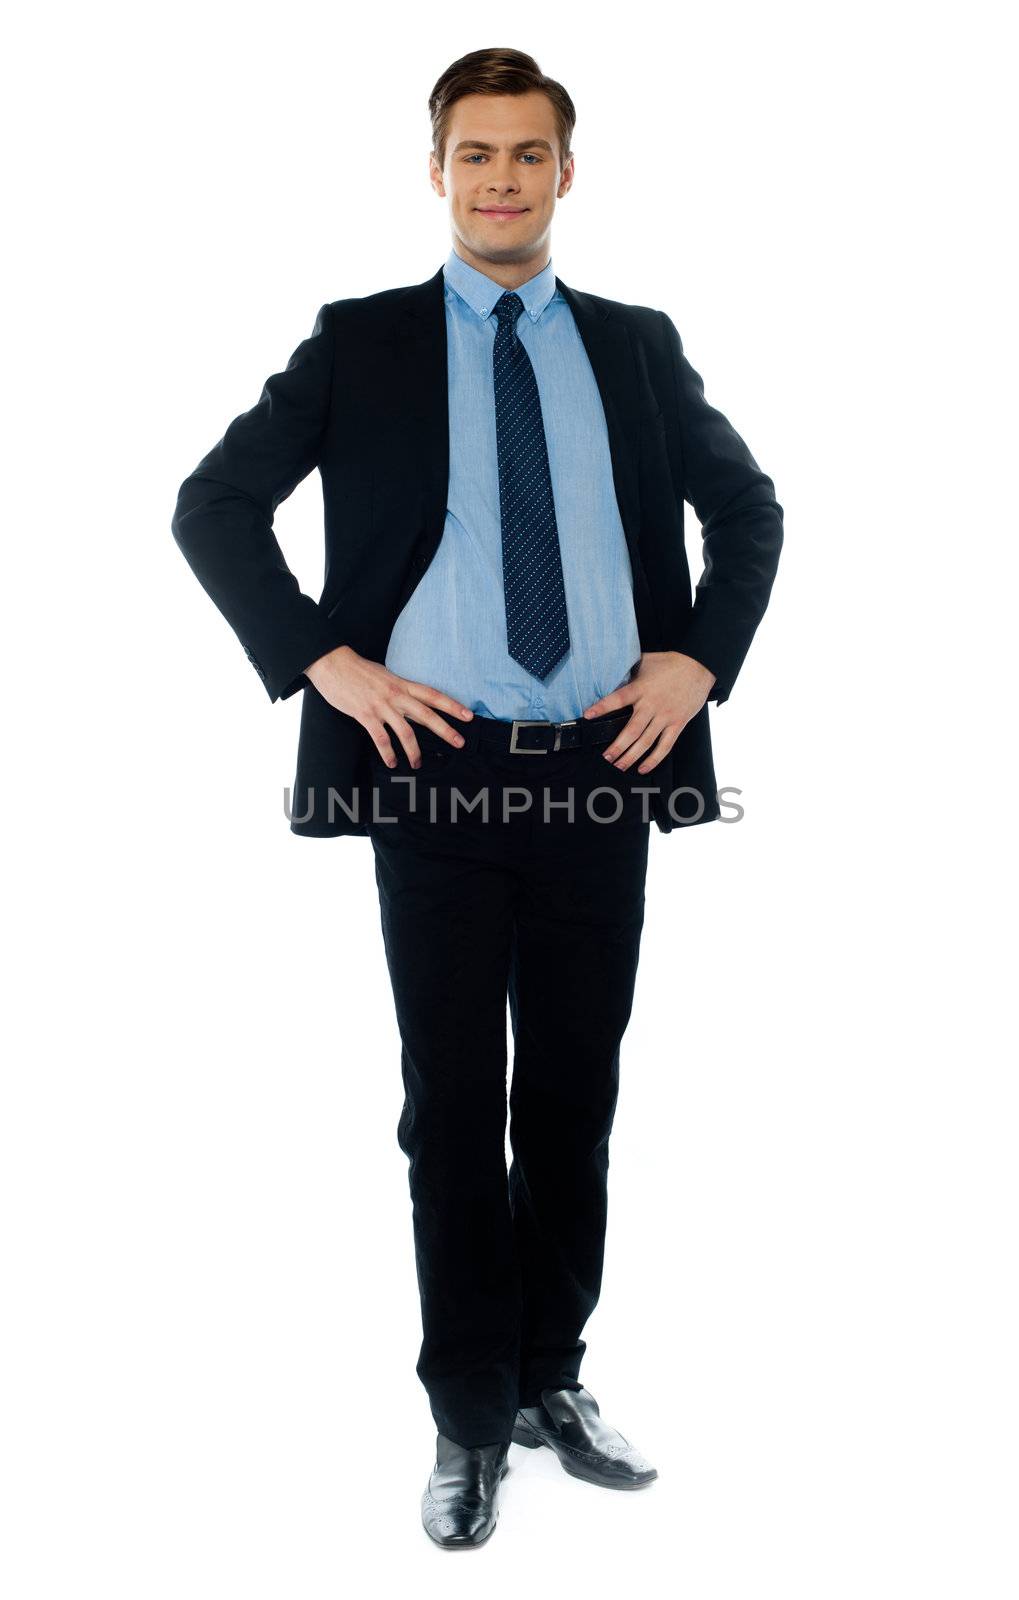 Stylish young executive in business suit posing with hands on his waist